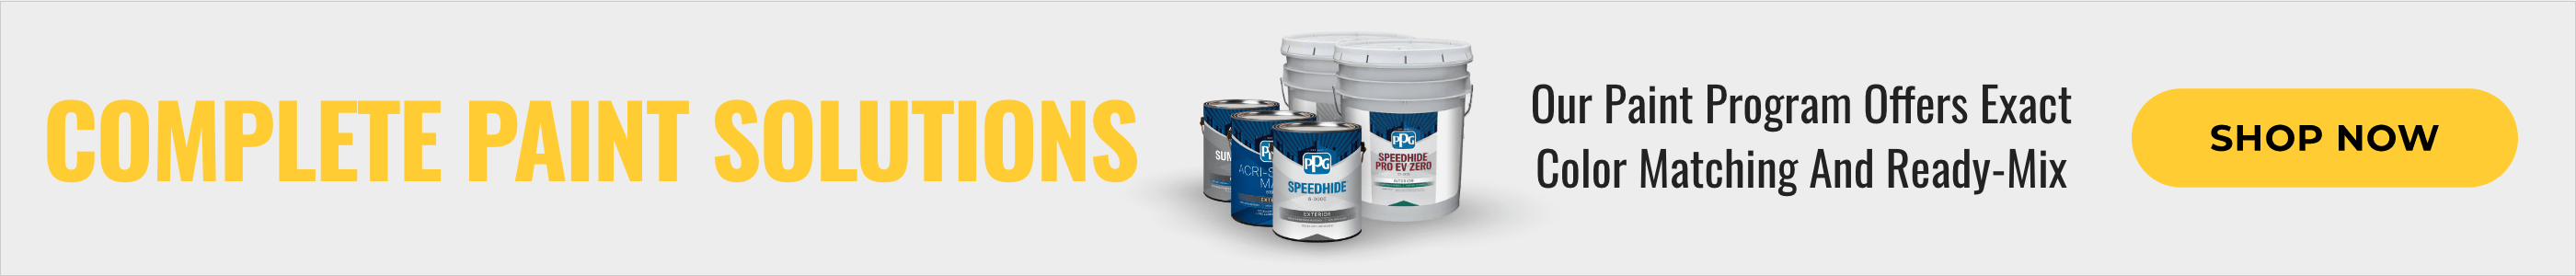 Complete Paint Solutions